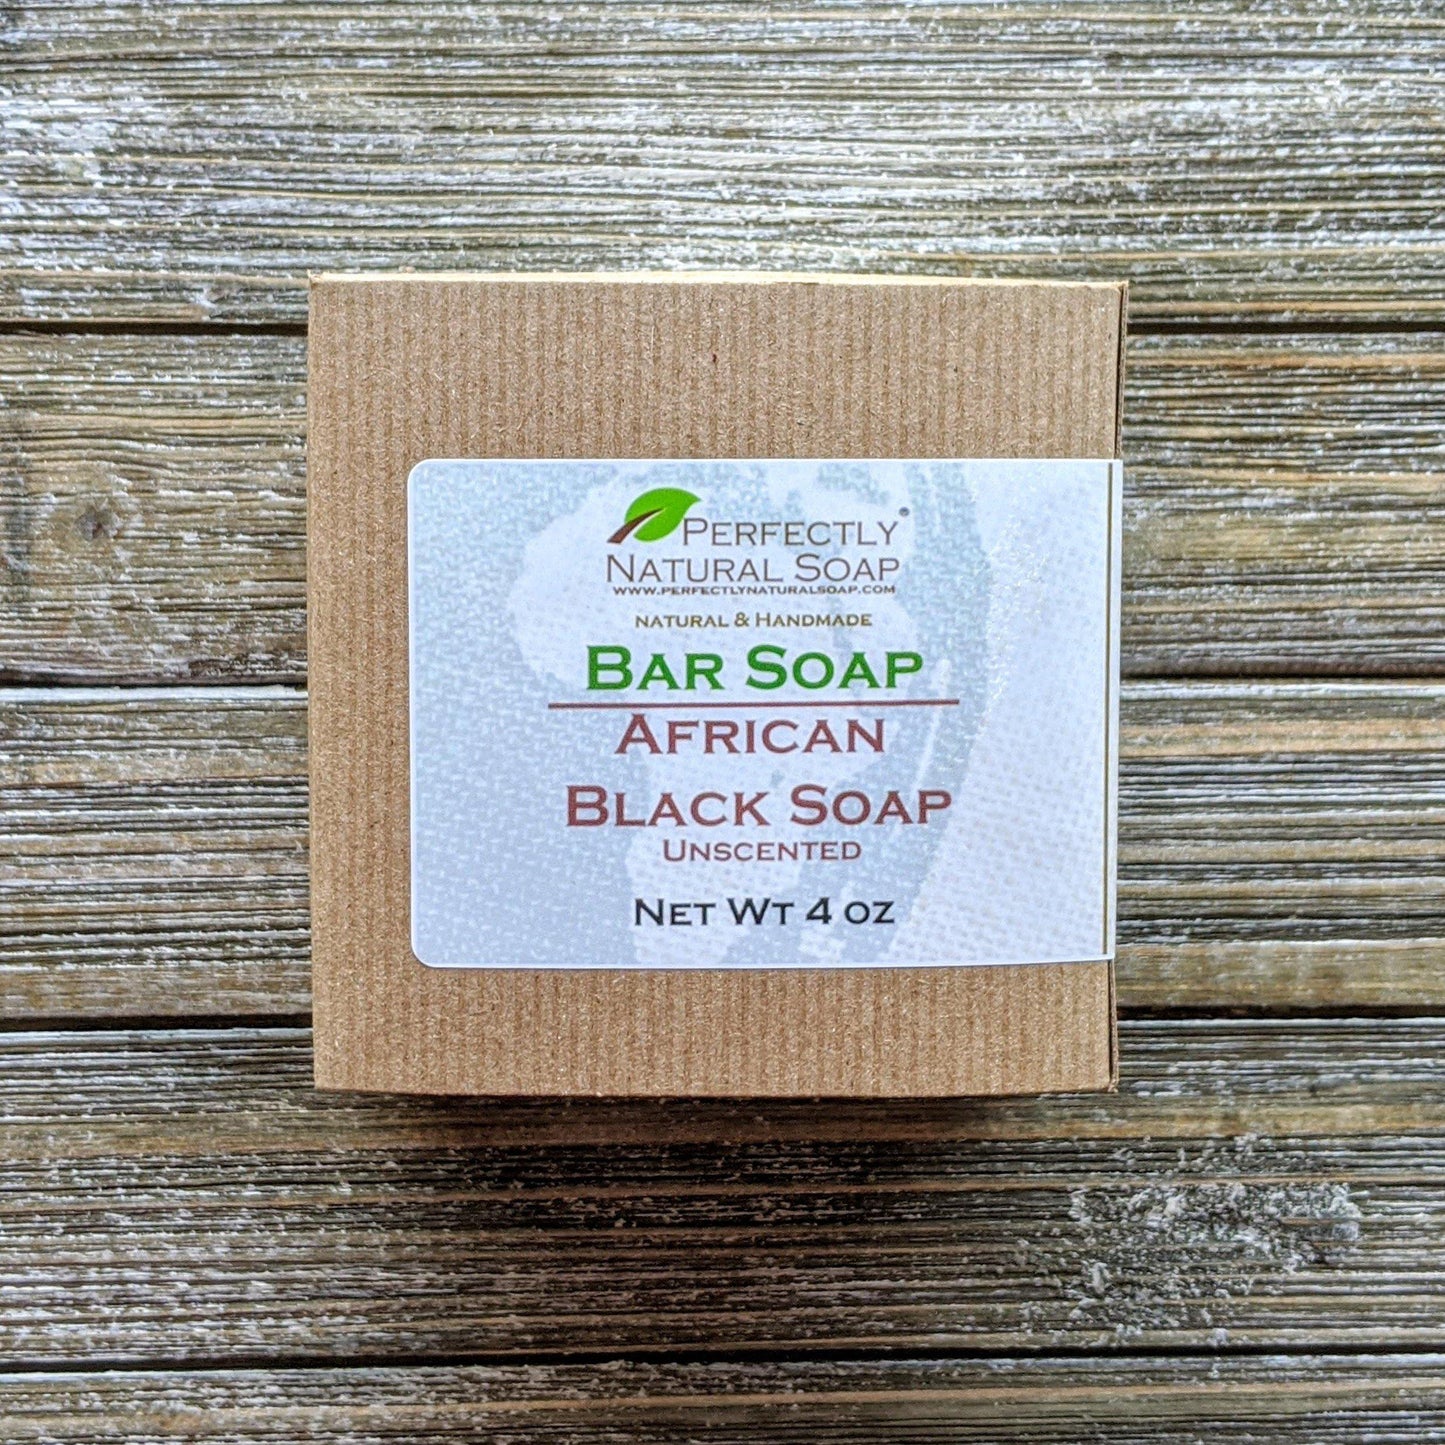 Authentic Imported Raw African Black Soap, 4 oz-Bar Soap-Perfectly Natural Soap